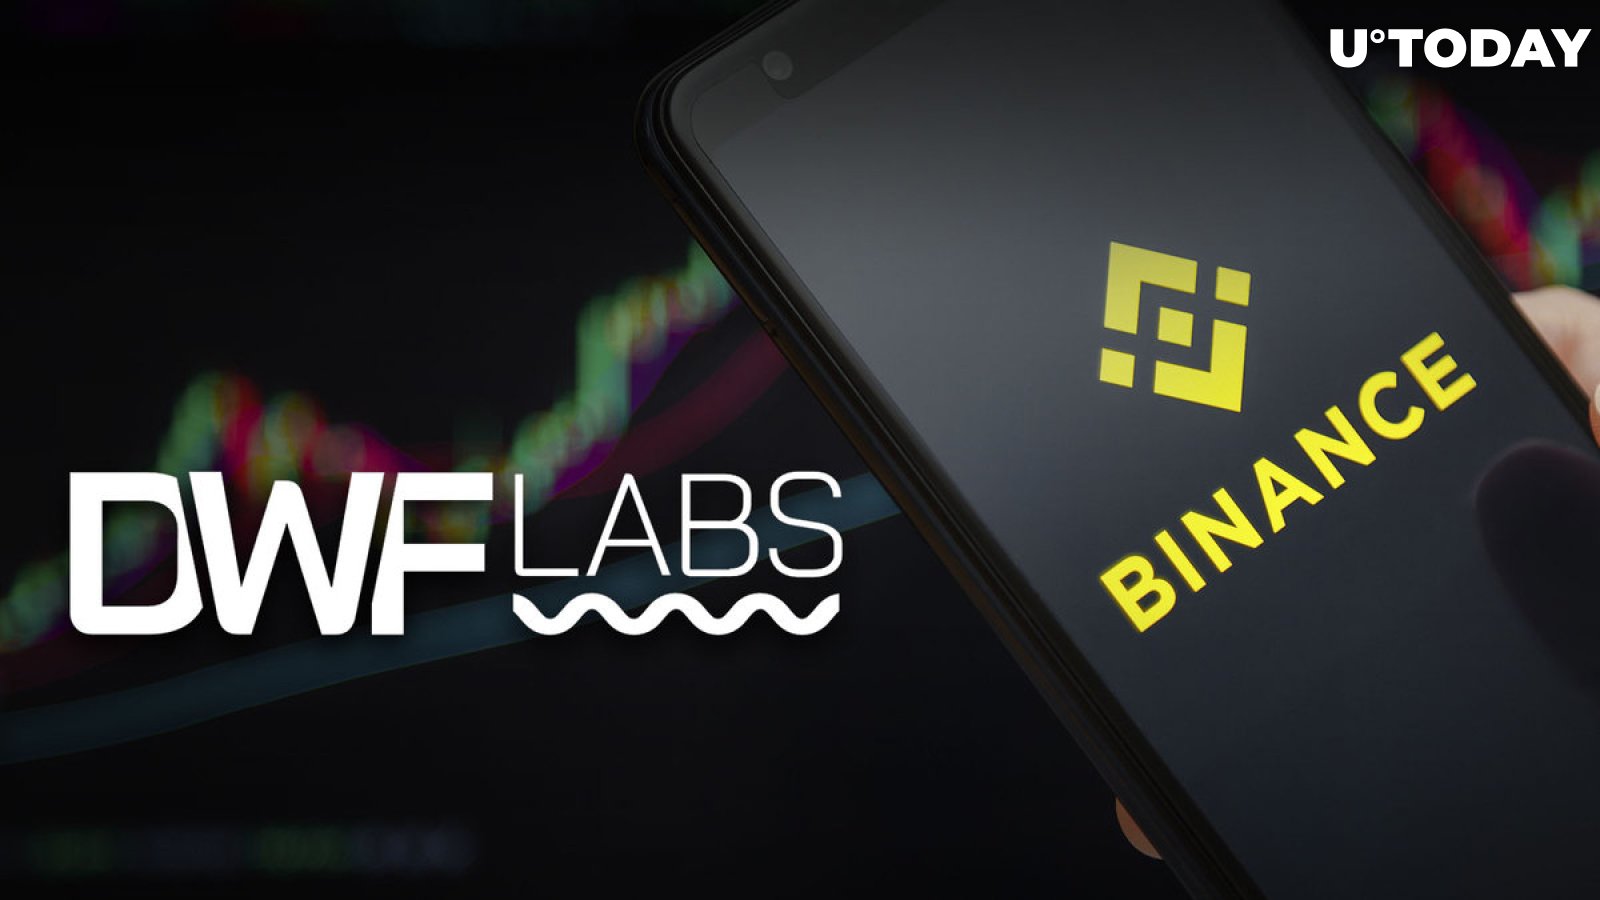 DWF Labs Allocates $15 Million for Binance Labs' Web3 Industry Recovery Initiative